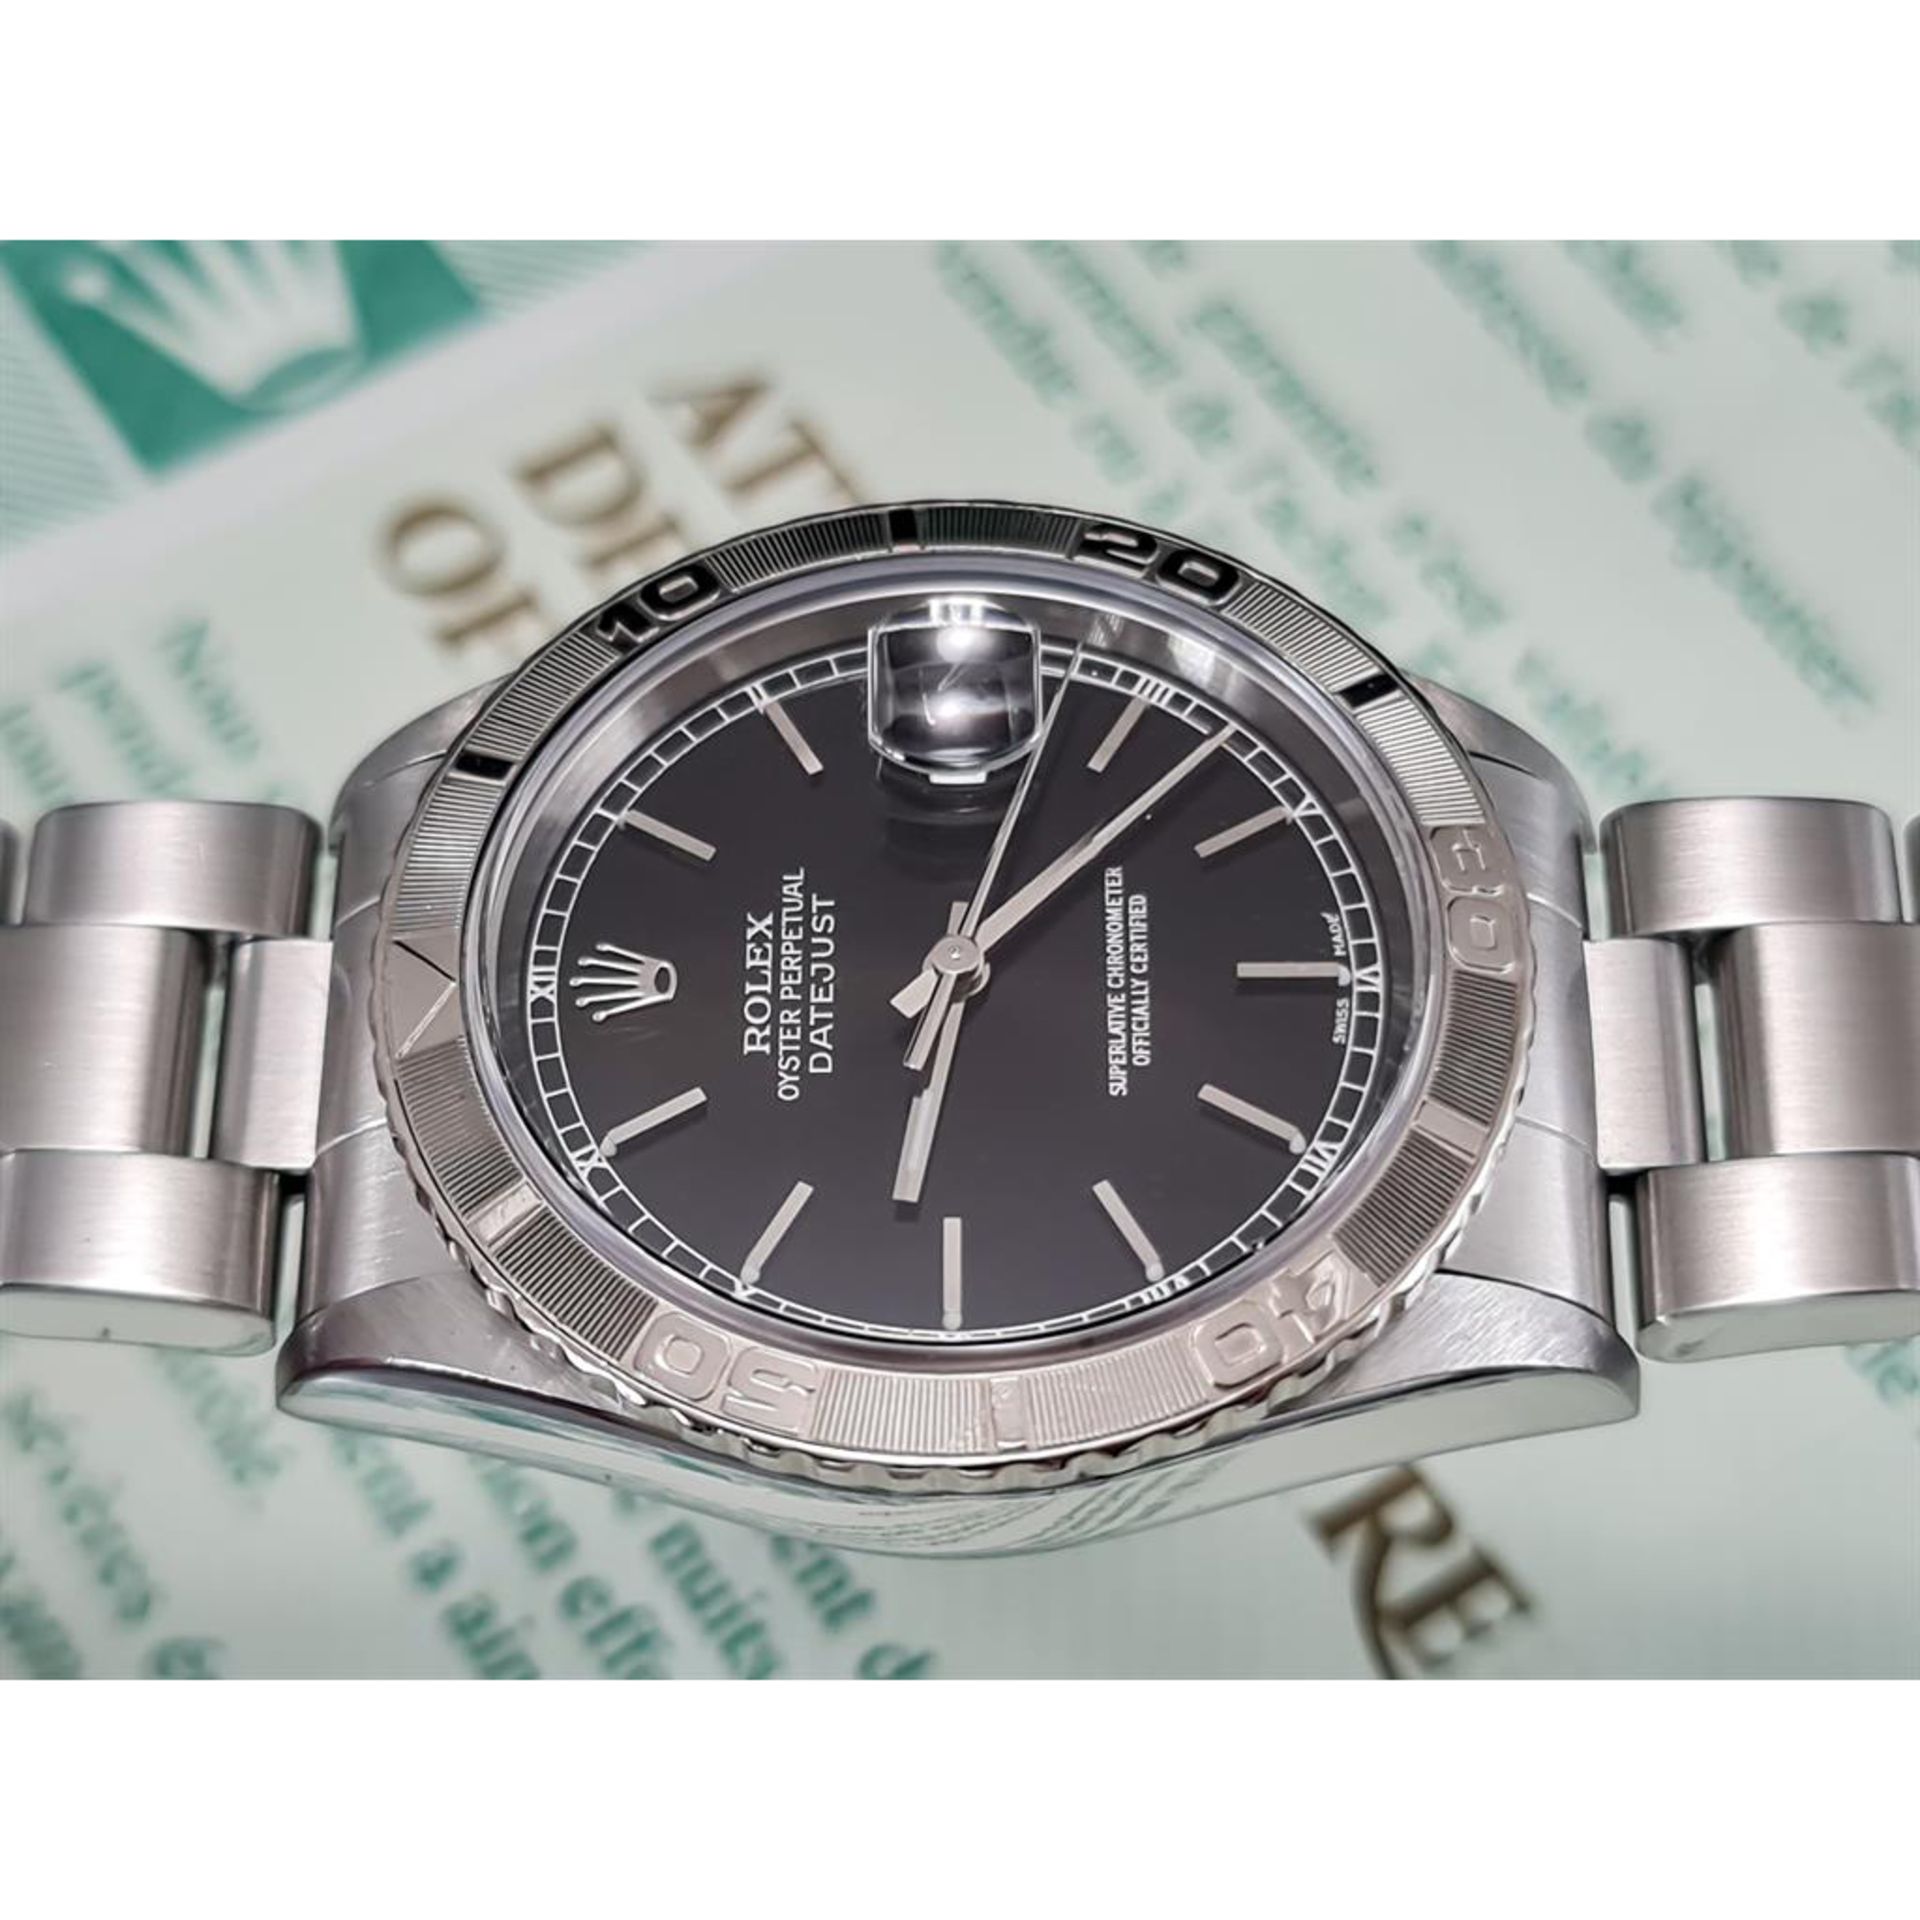 1999 Rolex Datejust Turn-O-Graph 16264 Steel White Gold - Black Dial - Oyster - Image 8 of 11